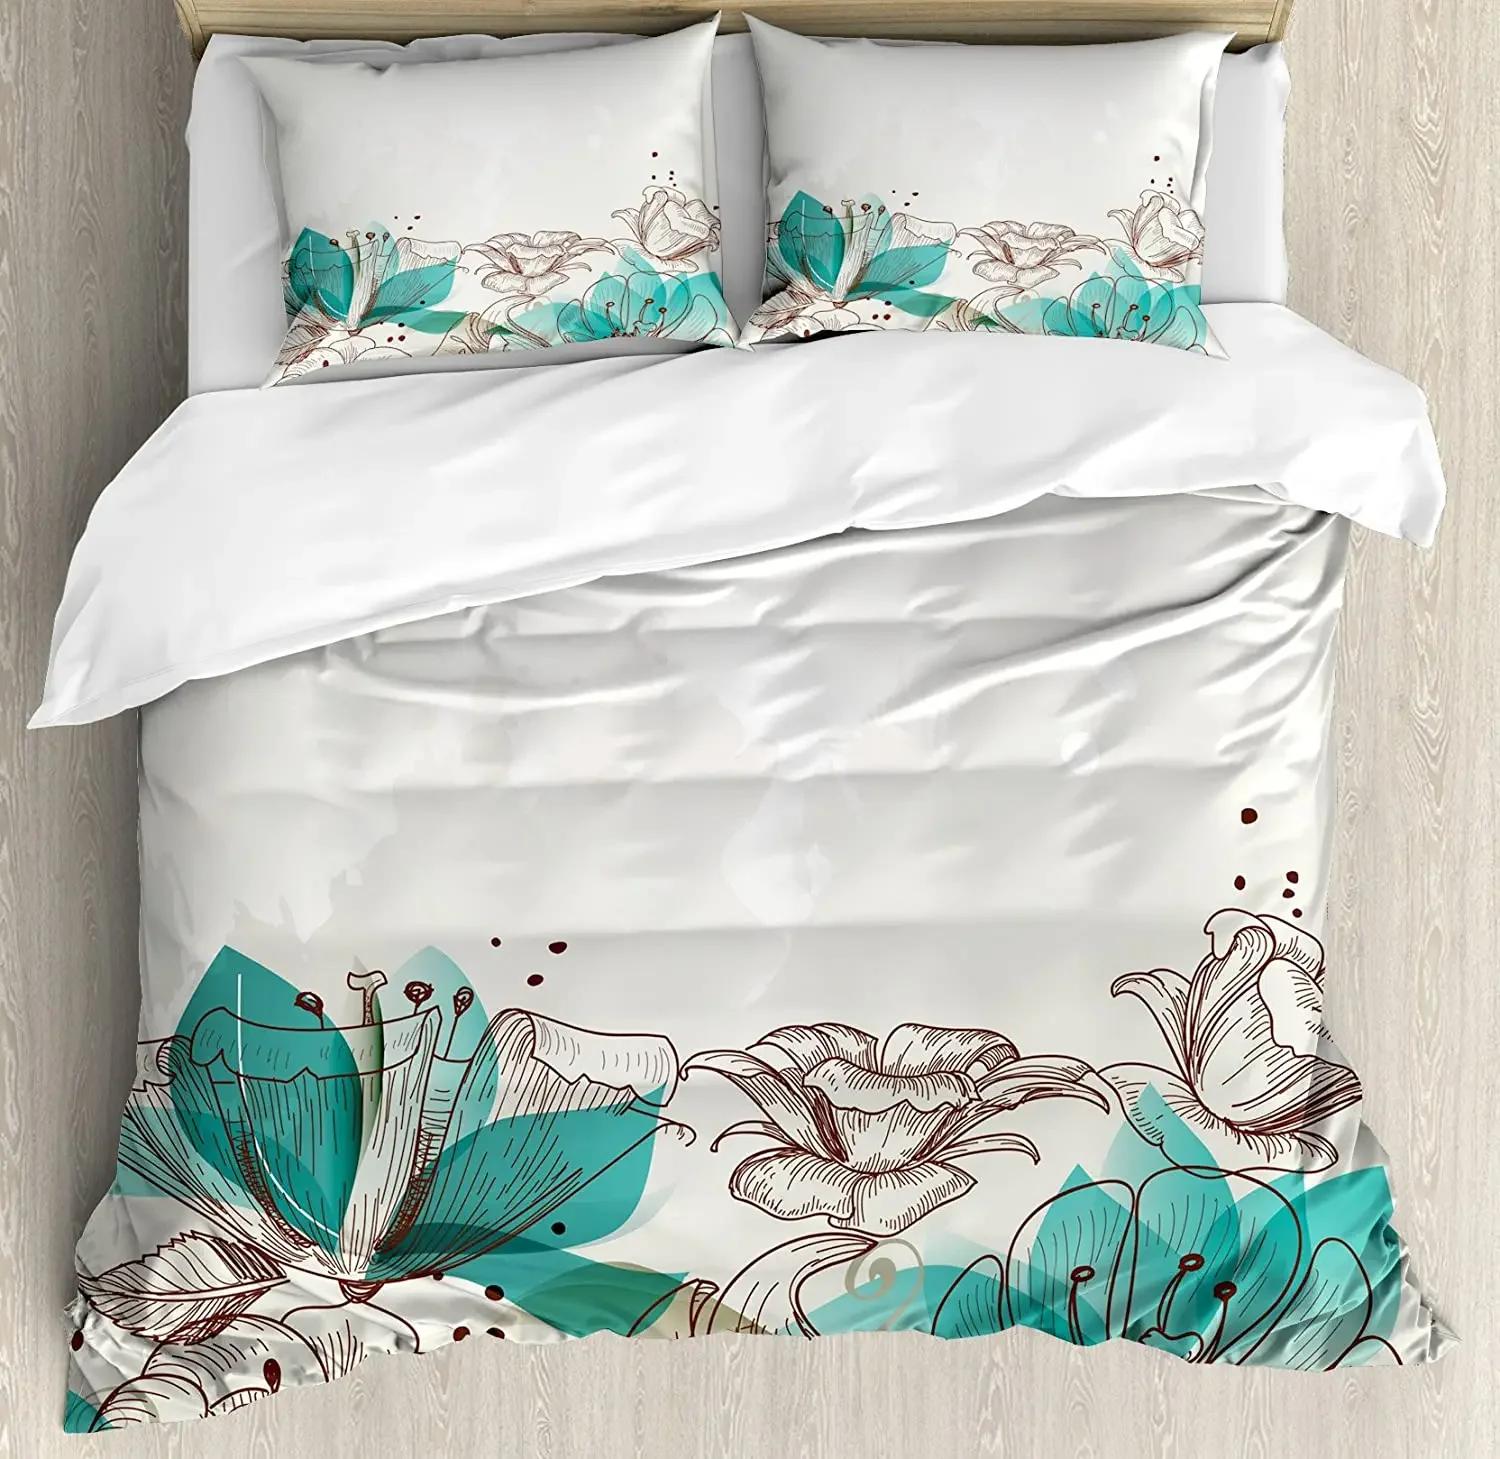 Turquoise Bedding Set For Bedroom Bed Home Retro Floral BackgroundHibiscus Silhouett Duvet Cover Quilt Cover Pillowc